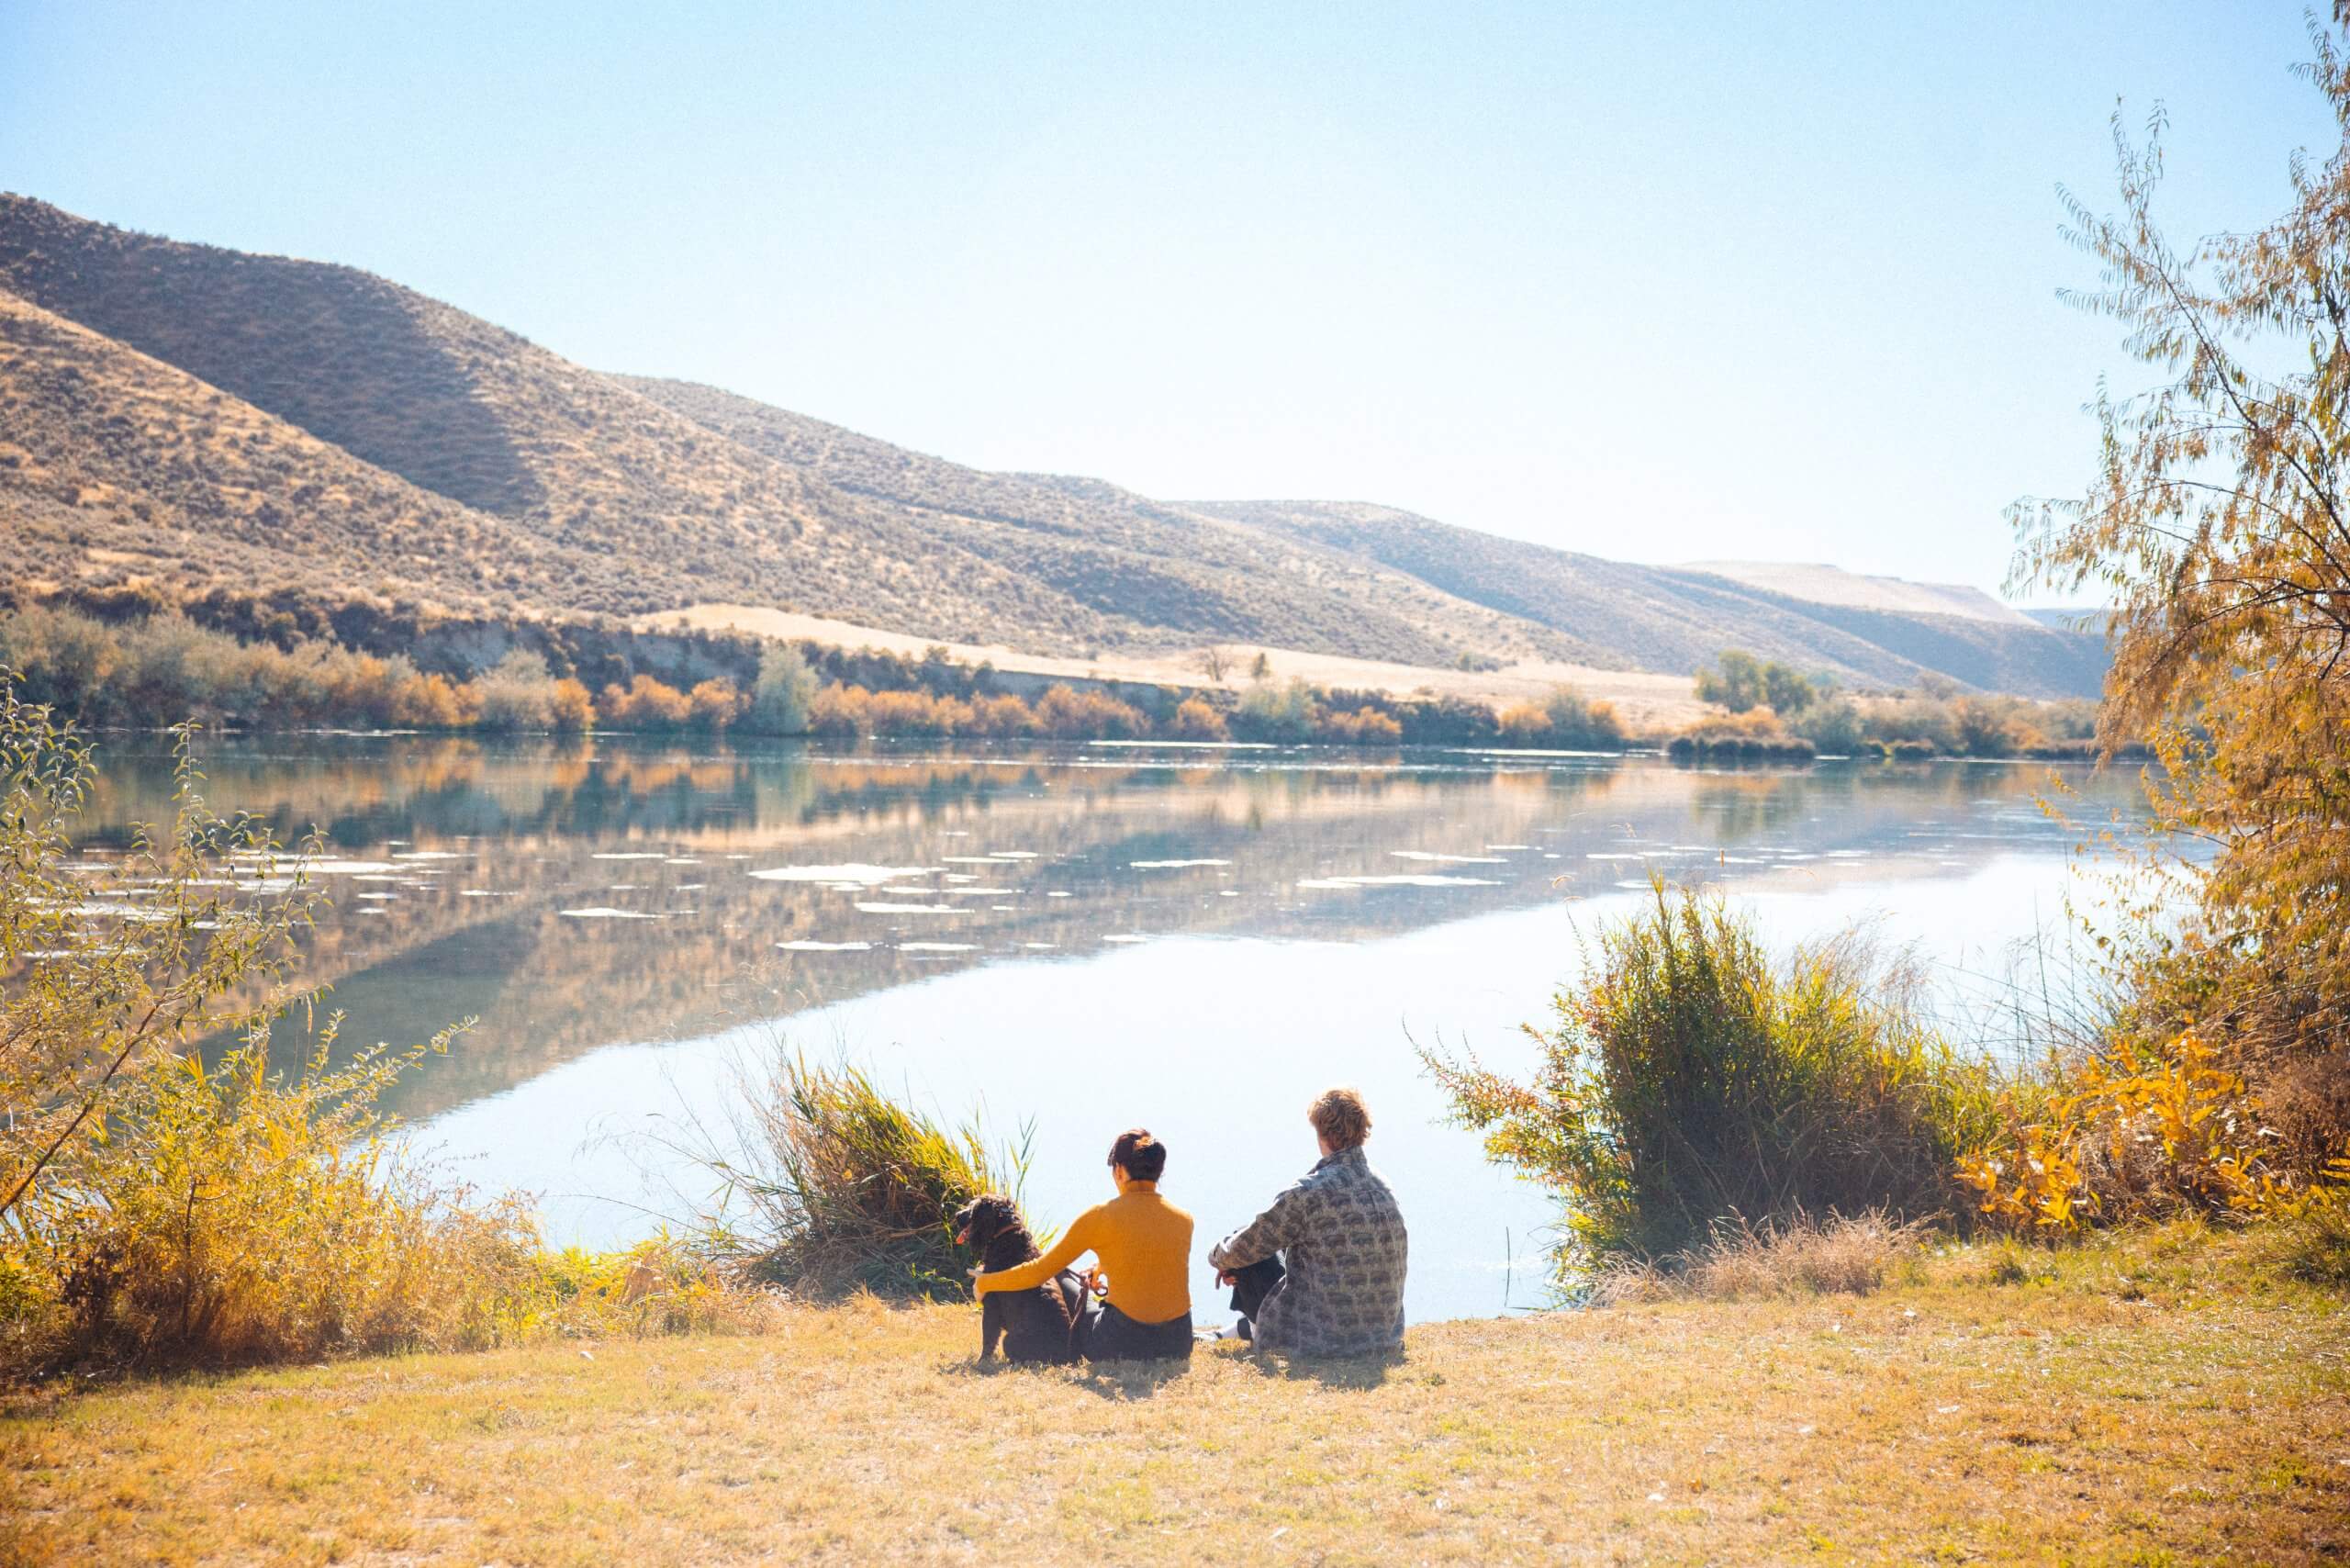 Two people sit with a dog and look out at a body of water in the fall.